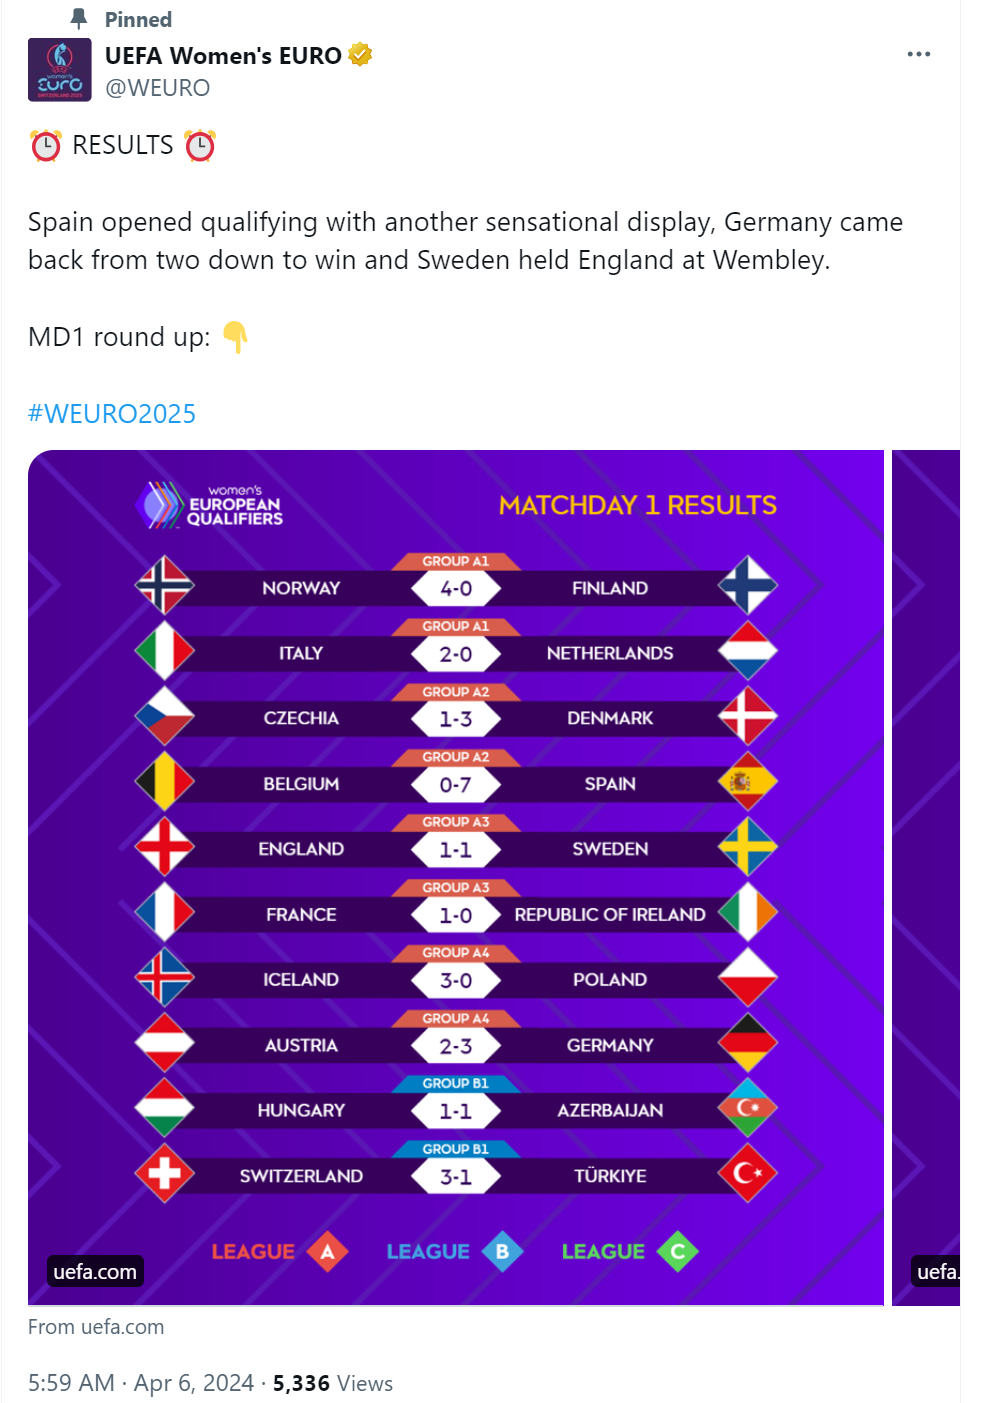 UEFA Women's EURO's tweet on April 6 about Matchday 1 results. /@WEURO